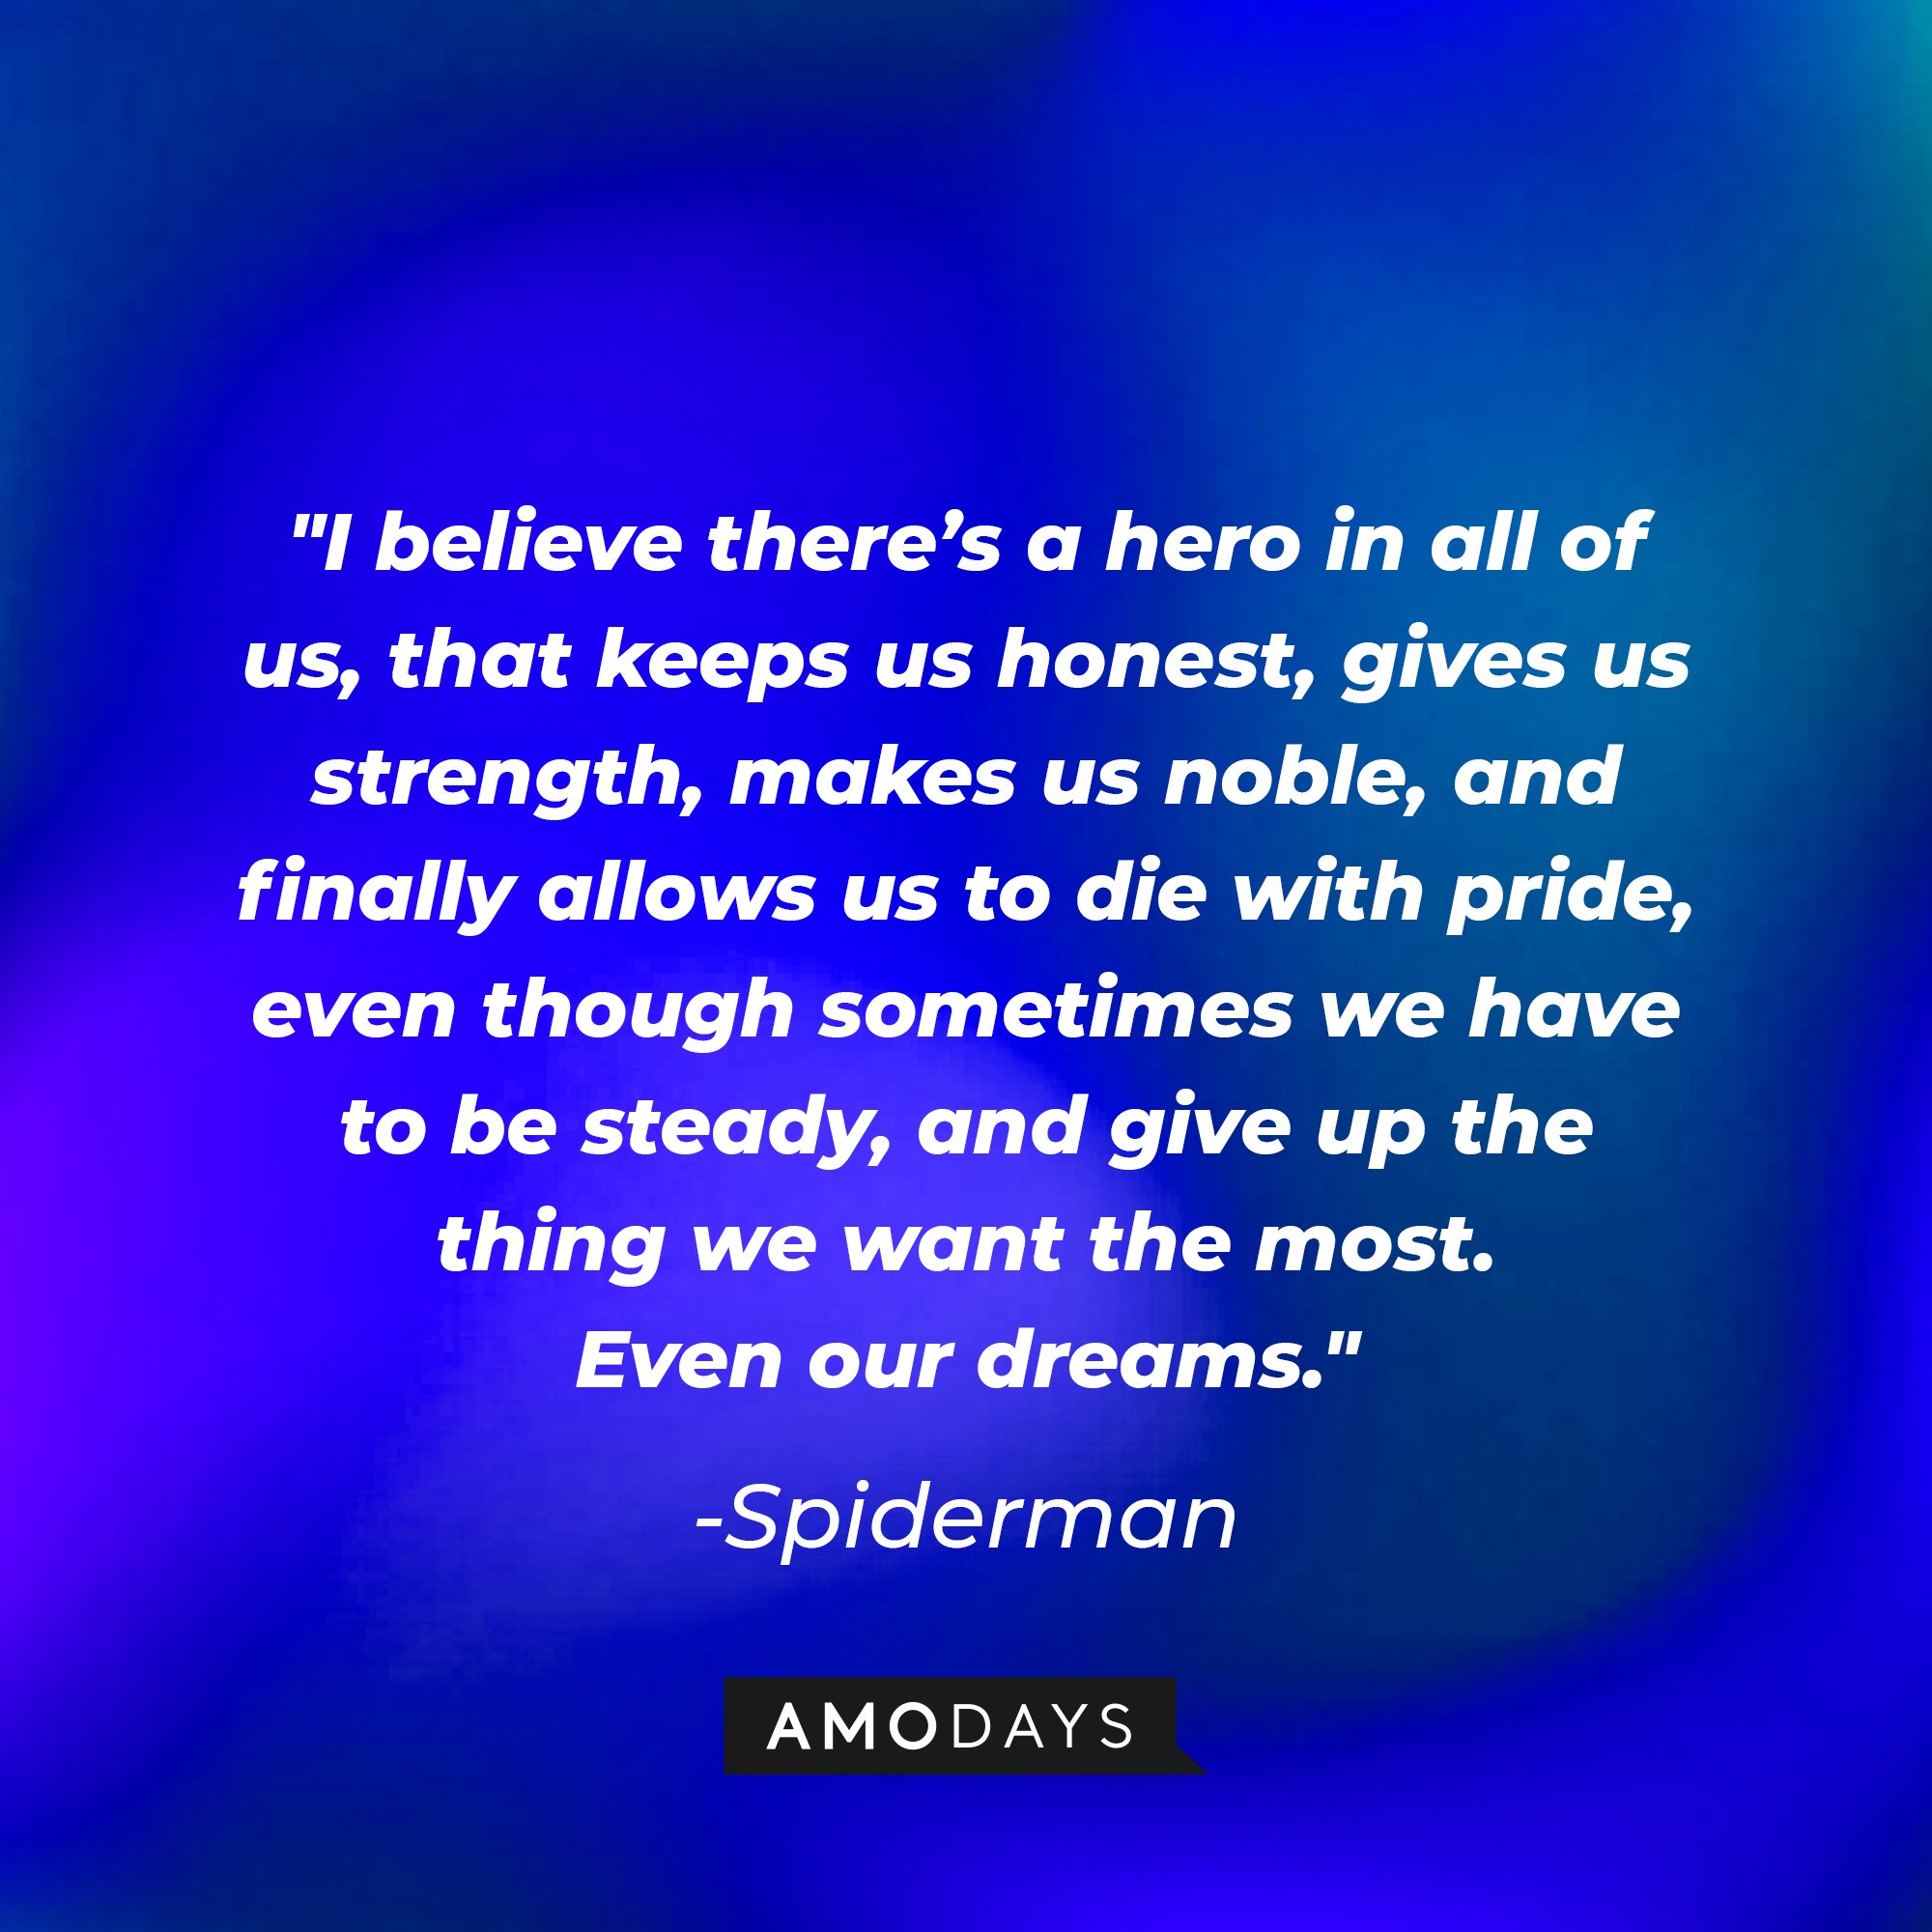 Spiderman's quote: "I believe there’s a hero in all of us, that keeps us honest, gives us strength, makes us noble, and finally allows us to die with pride, even though sometimes we have to be steady, and give up the thing we want the most. Even our dreams." | Image: AmoDays 